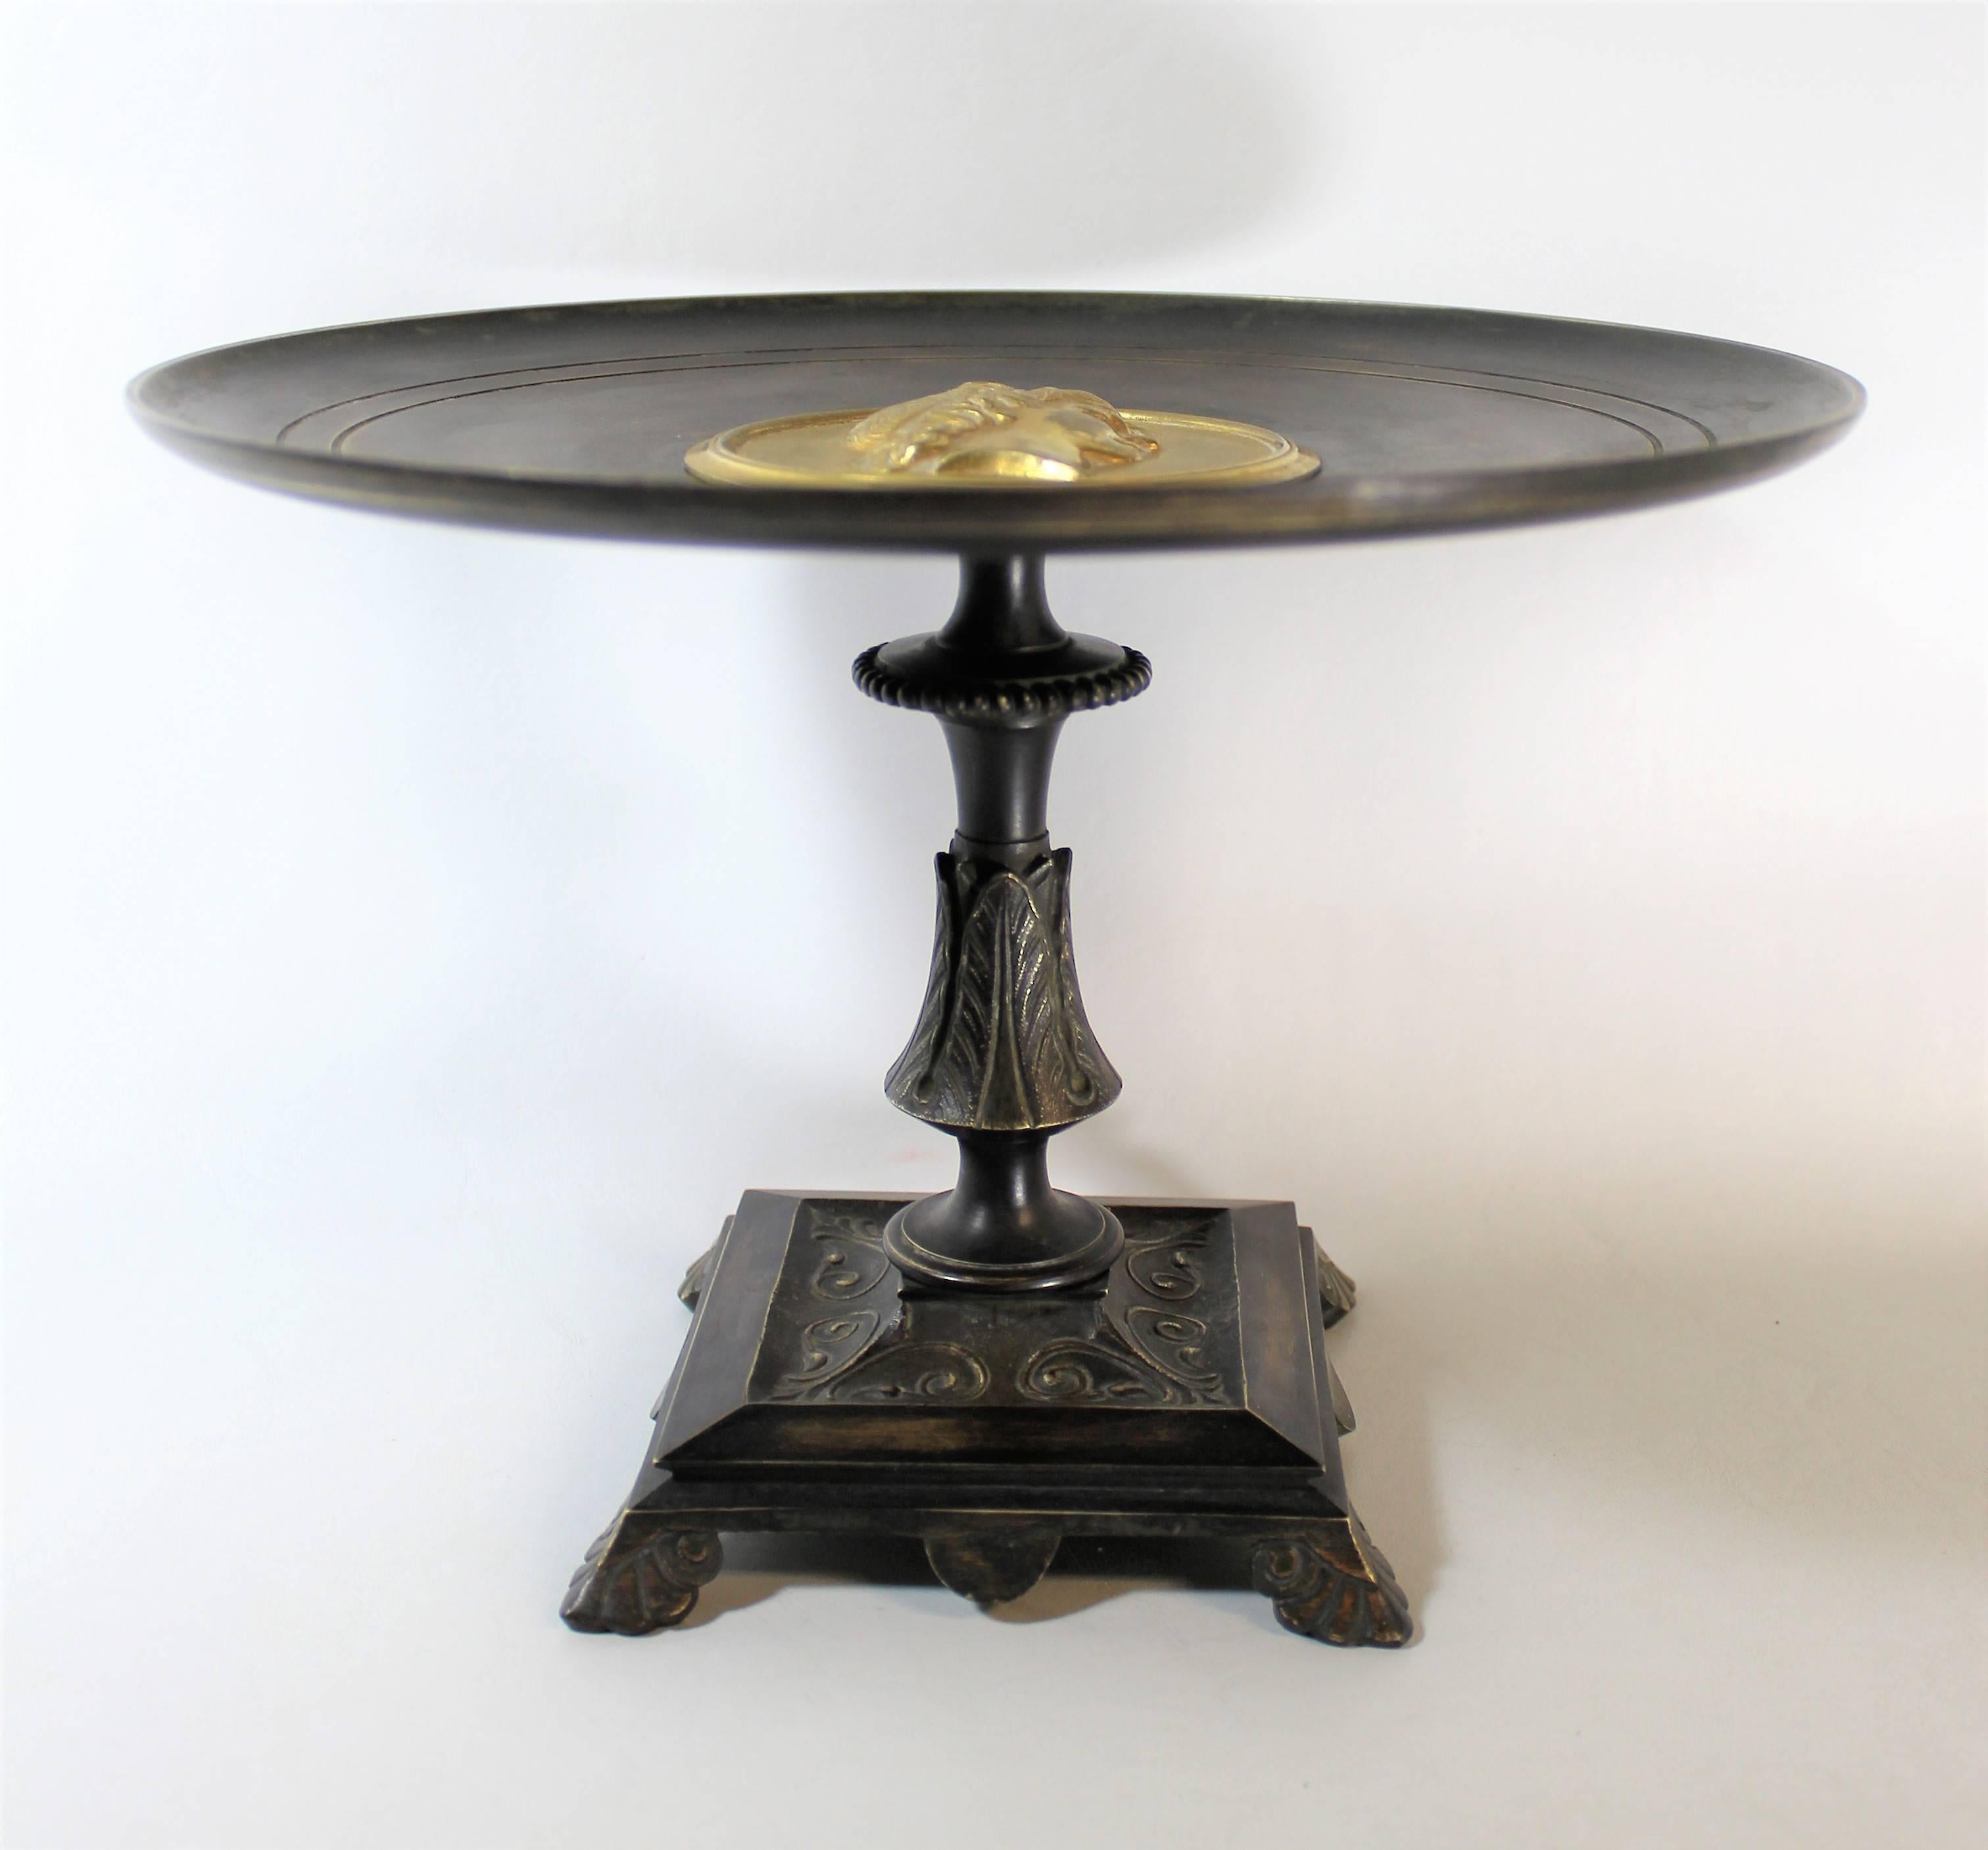 19th century neoclassical style bronze and ebonized tazz with gold gilt medallion.